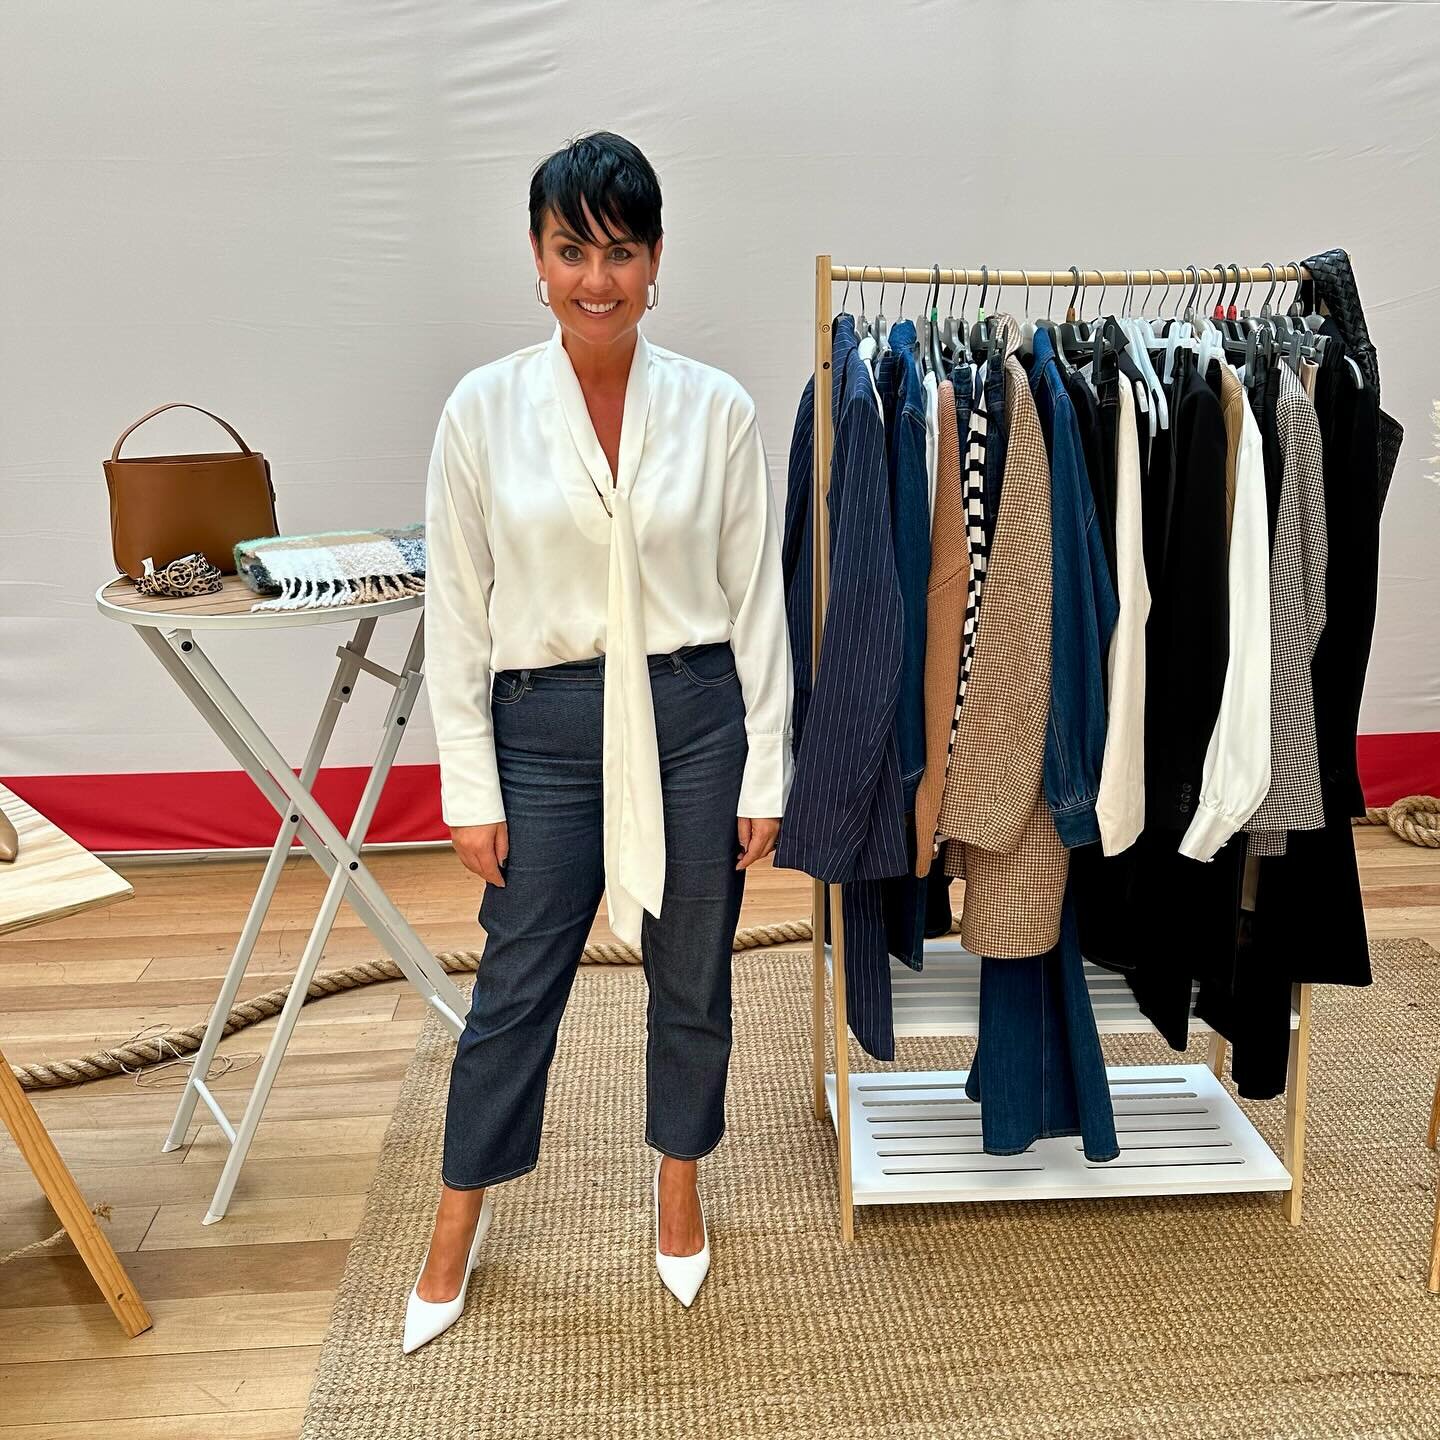 &bull; F A S H I O N - W O R K S H O P S &bull;
#styledbyjade #westfieldstylist #stylingworkshop 

The past two days I have had the absolute pleasure of hosting two fashion workshops at @westfieldgeelong sharing all things fashion 🤎

Thank you to al